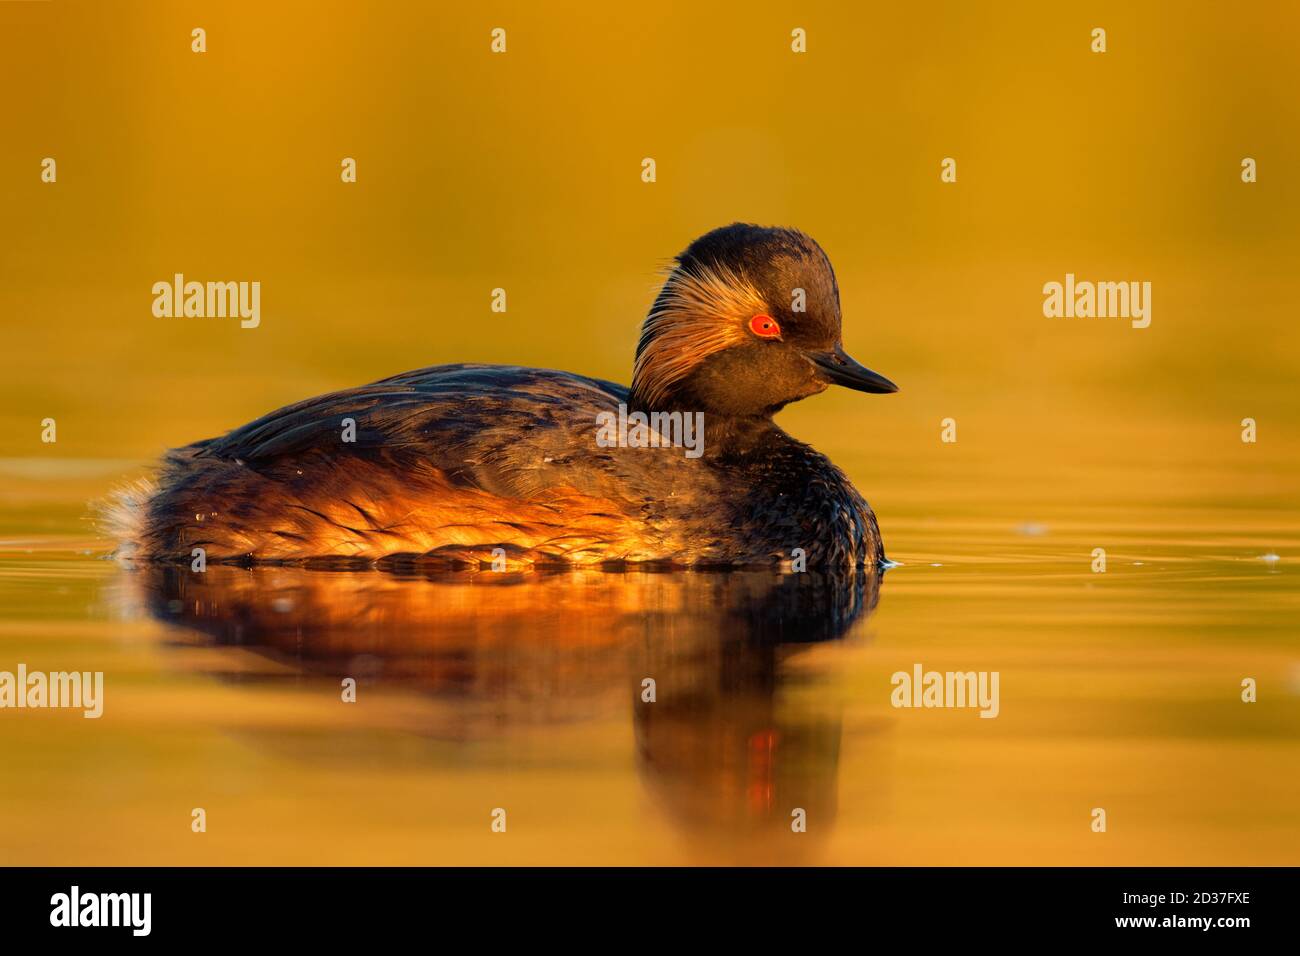 Eared Grebe - Podiceps nigricollis water bird swimming in the water in the red evening sunlight, member of the grebe family of water birds. Stock Photo